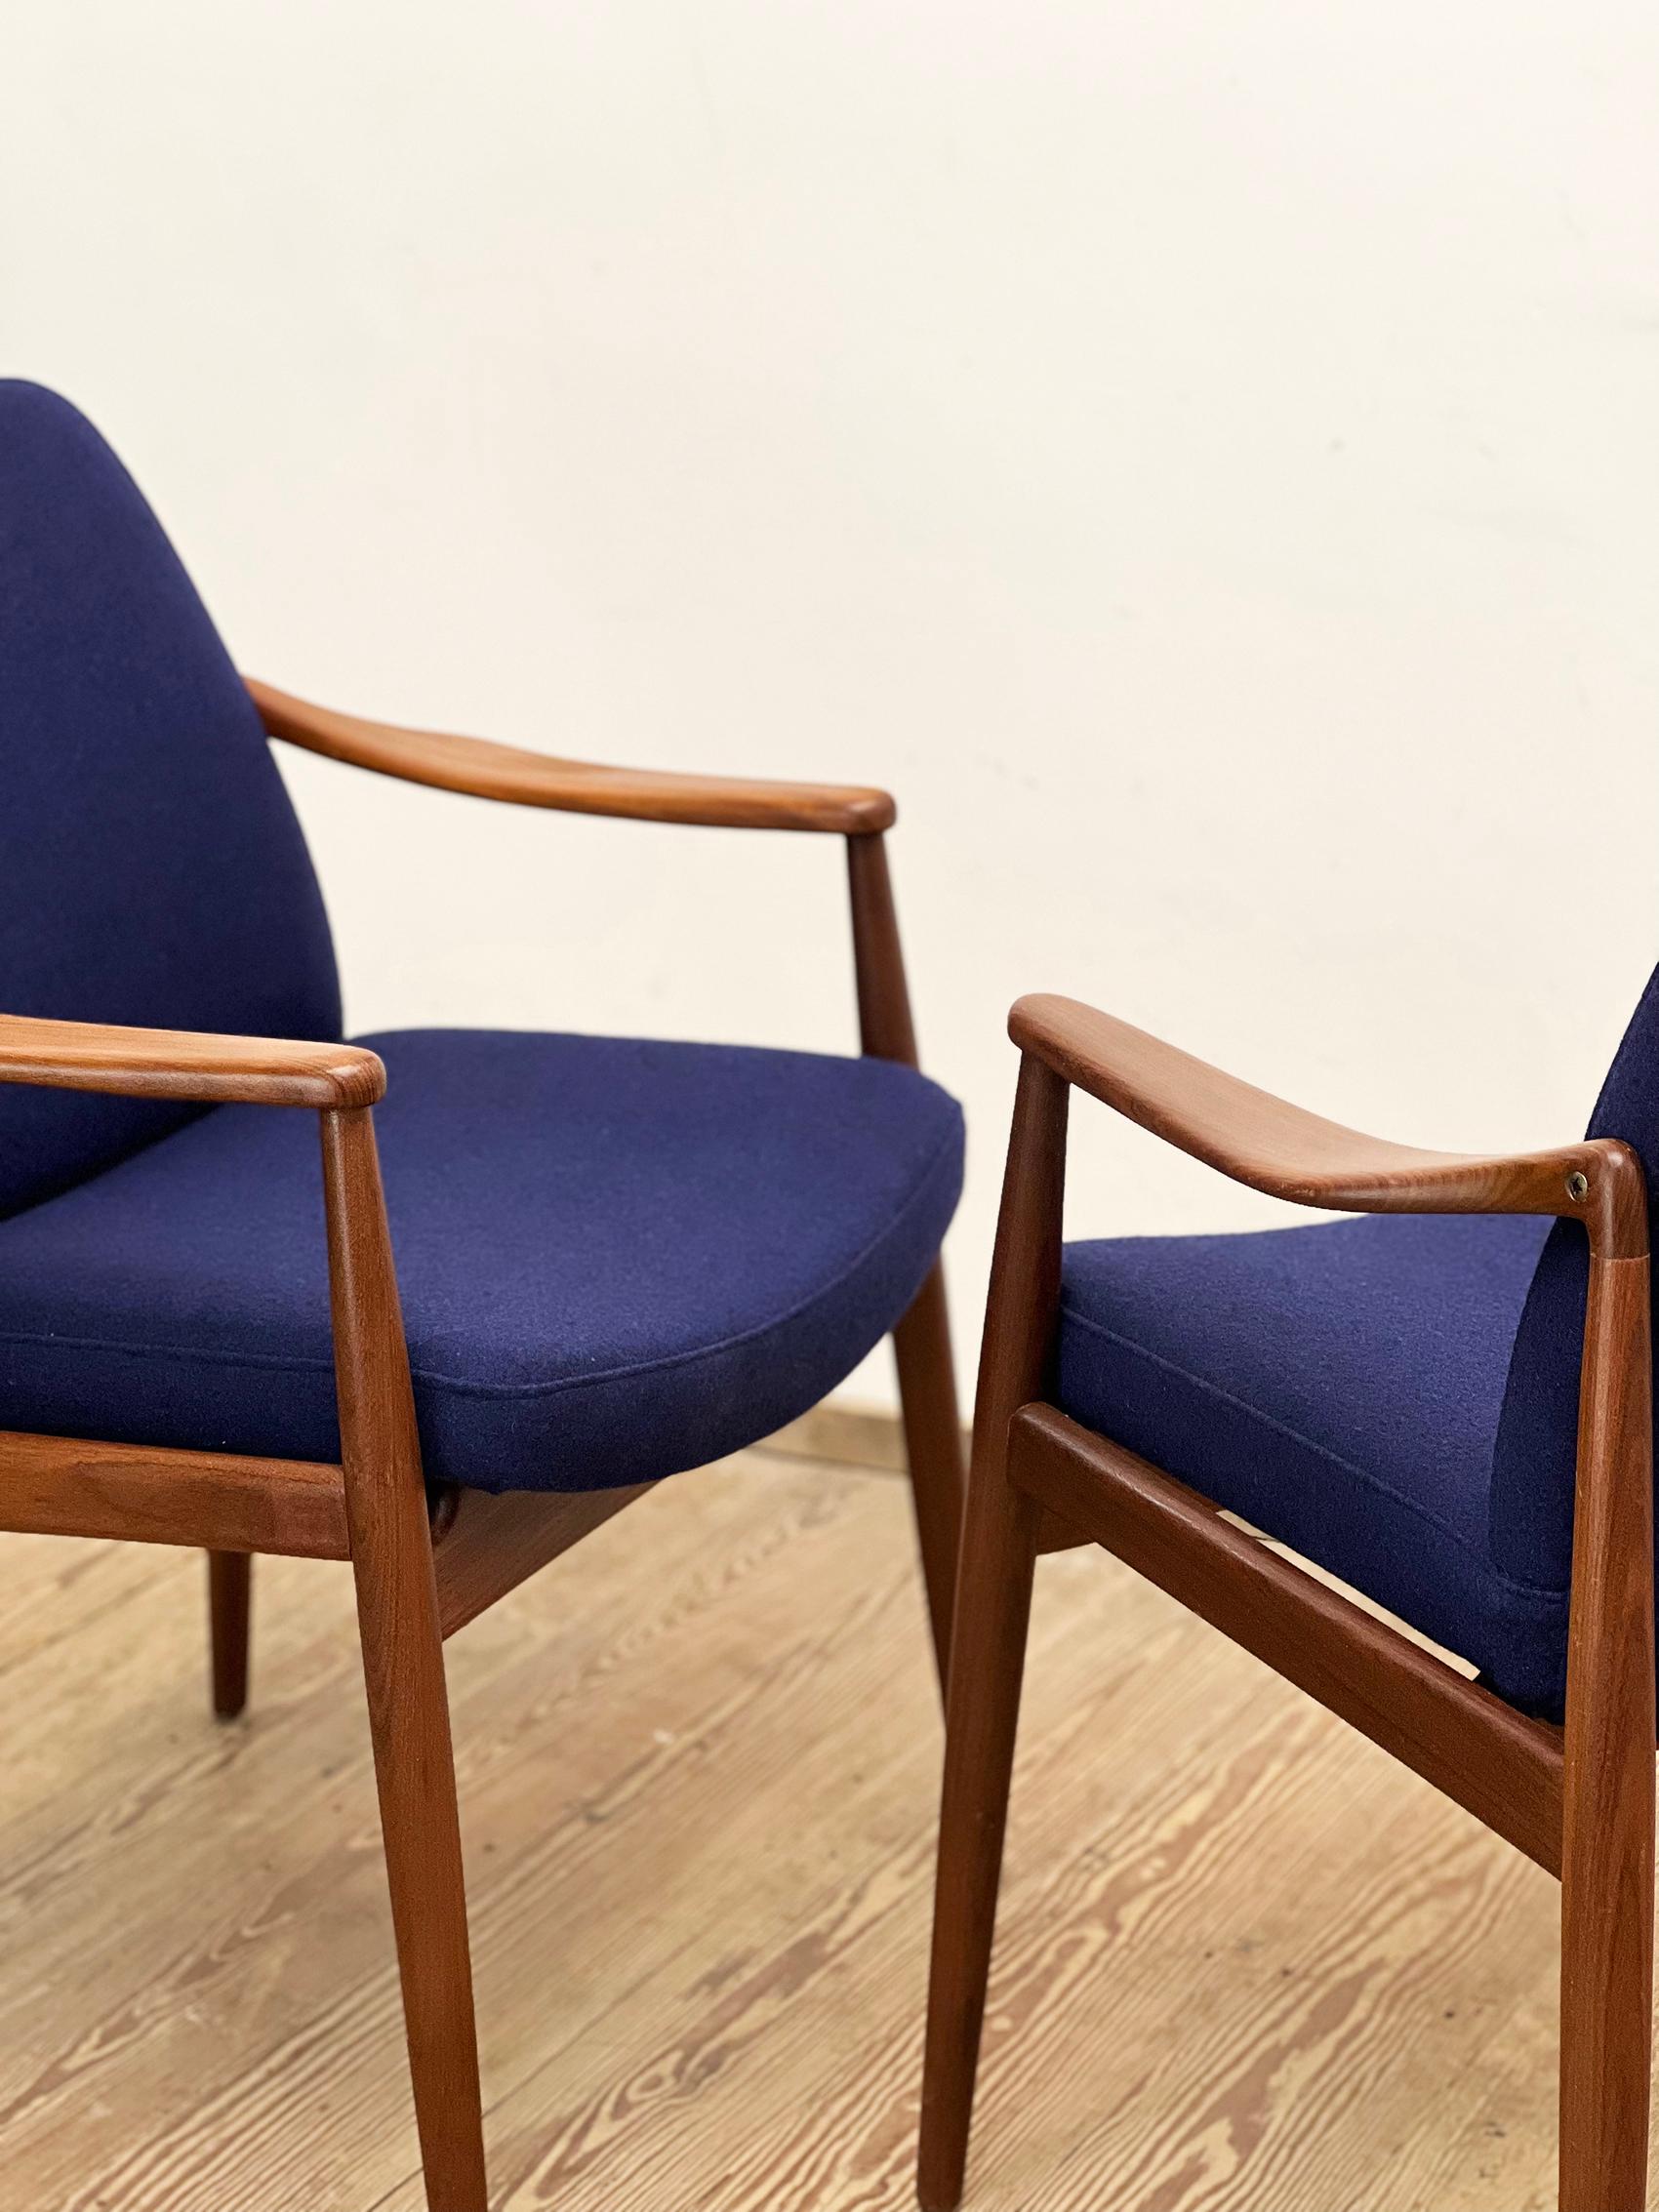 Two Mid-Century Modern Teak Armchairs by Hartmut Lohmeyer for Wilkhahn, 1950s For Sale 2